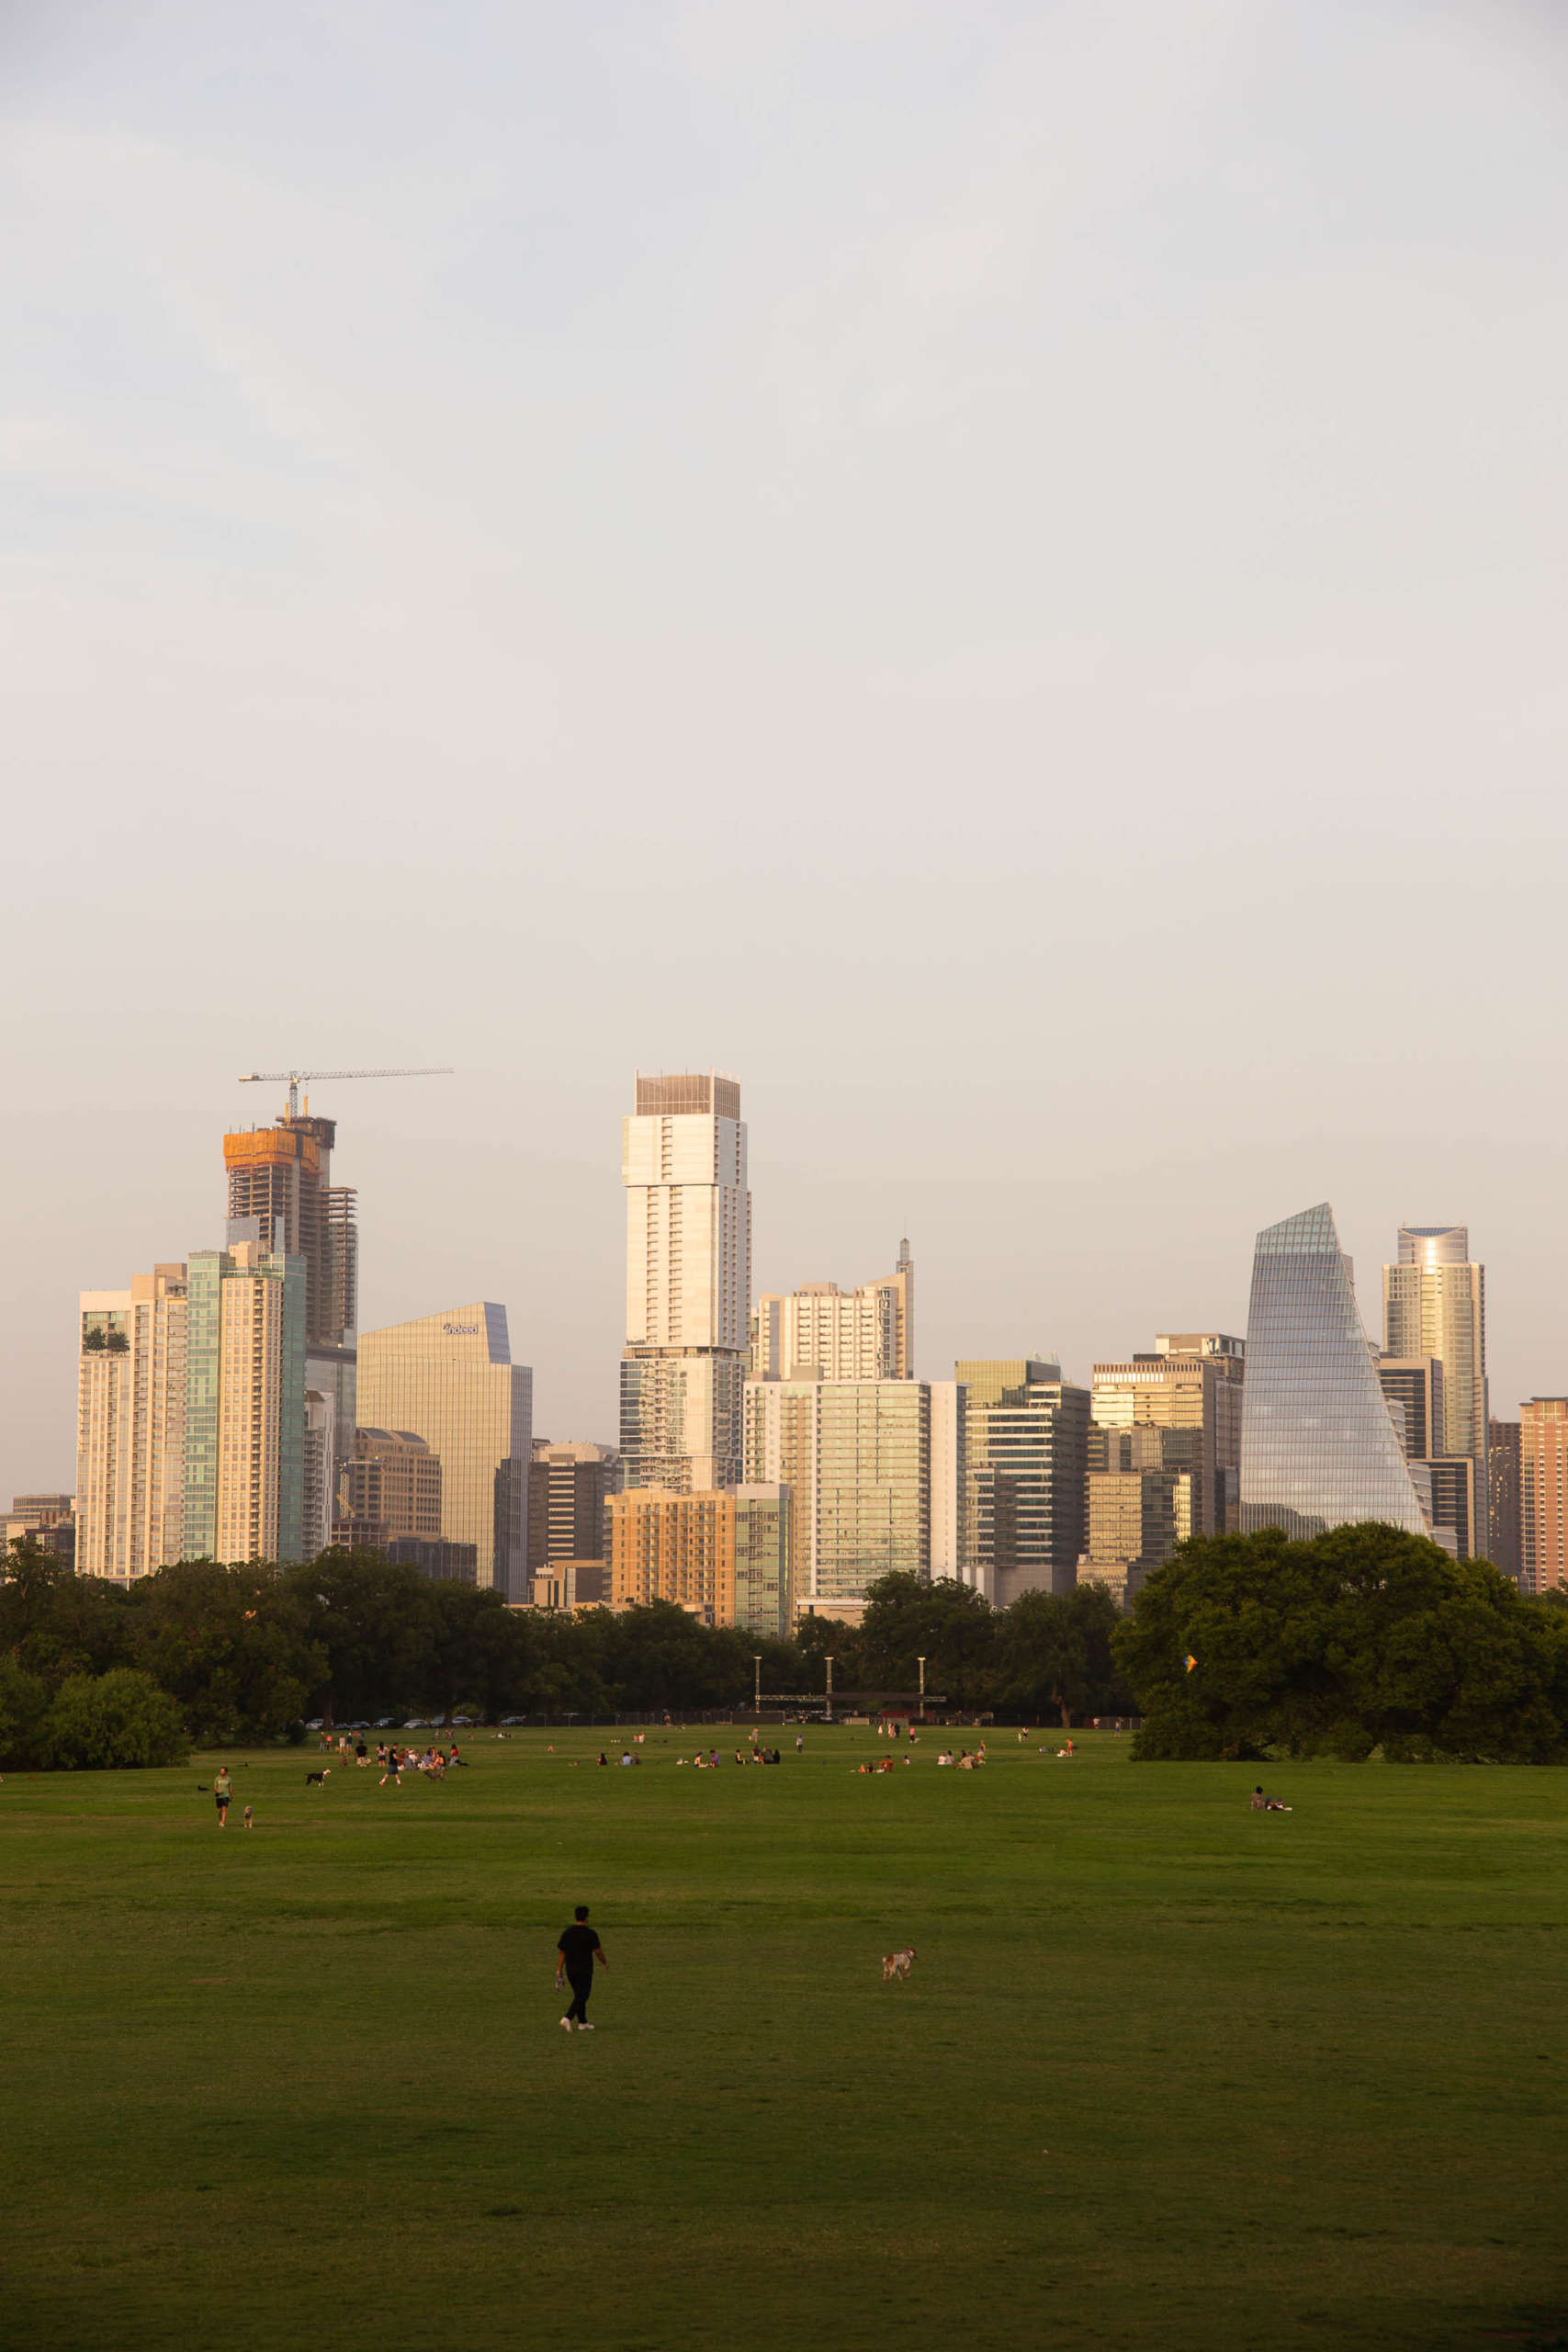 A city skyline, seen from across an open grassy park. People are scattered on the grass in the distance, watching a game, while a man plays with a dog in the foreground. The city buildings reflect the last quiet colors of a sunset: blue, tan, soft orange, white. The sky above them is similarly softly-colored, pink and blue, with traces of clouds.